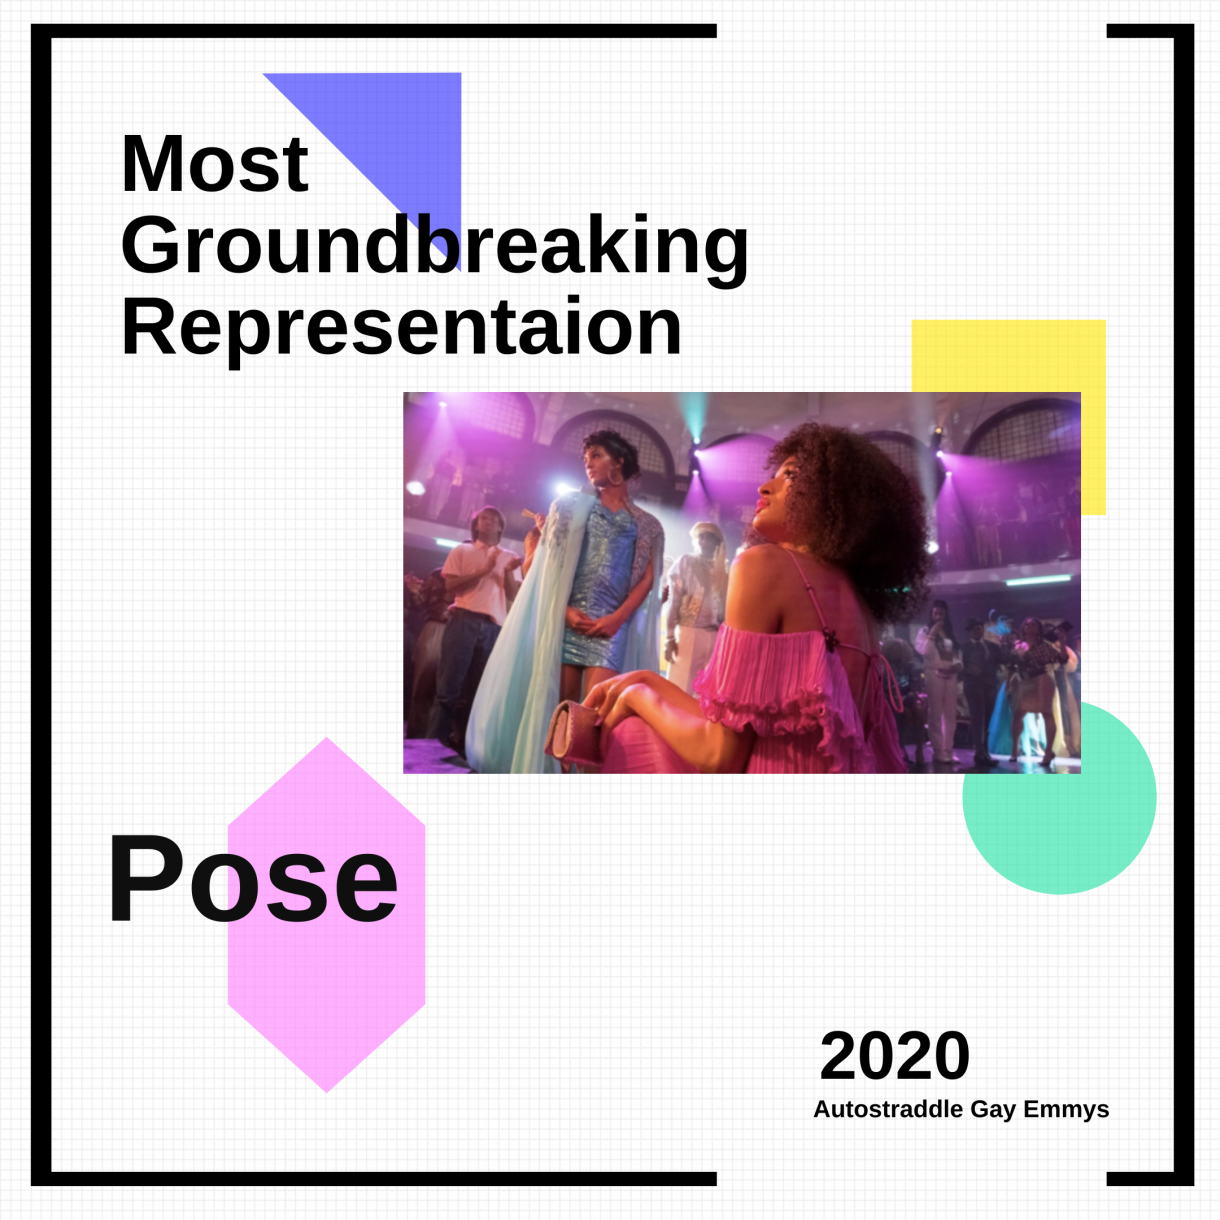 Graphic announcing Most Groundbreaking Representation (Show): Pose